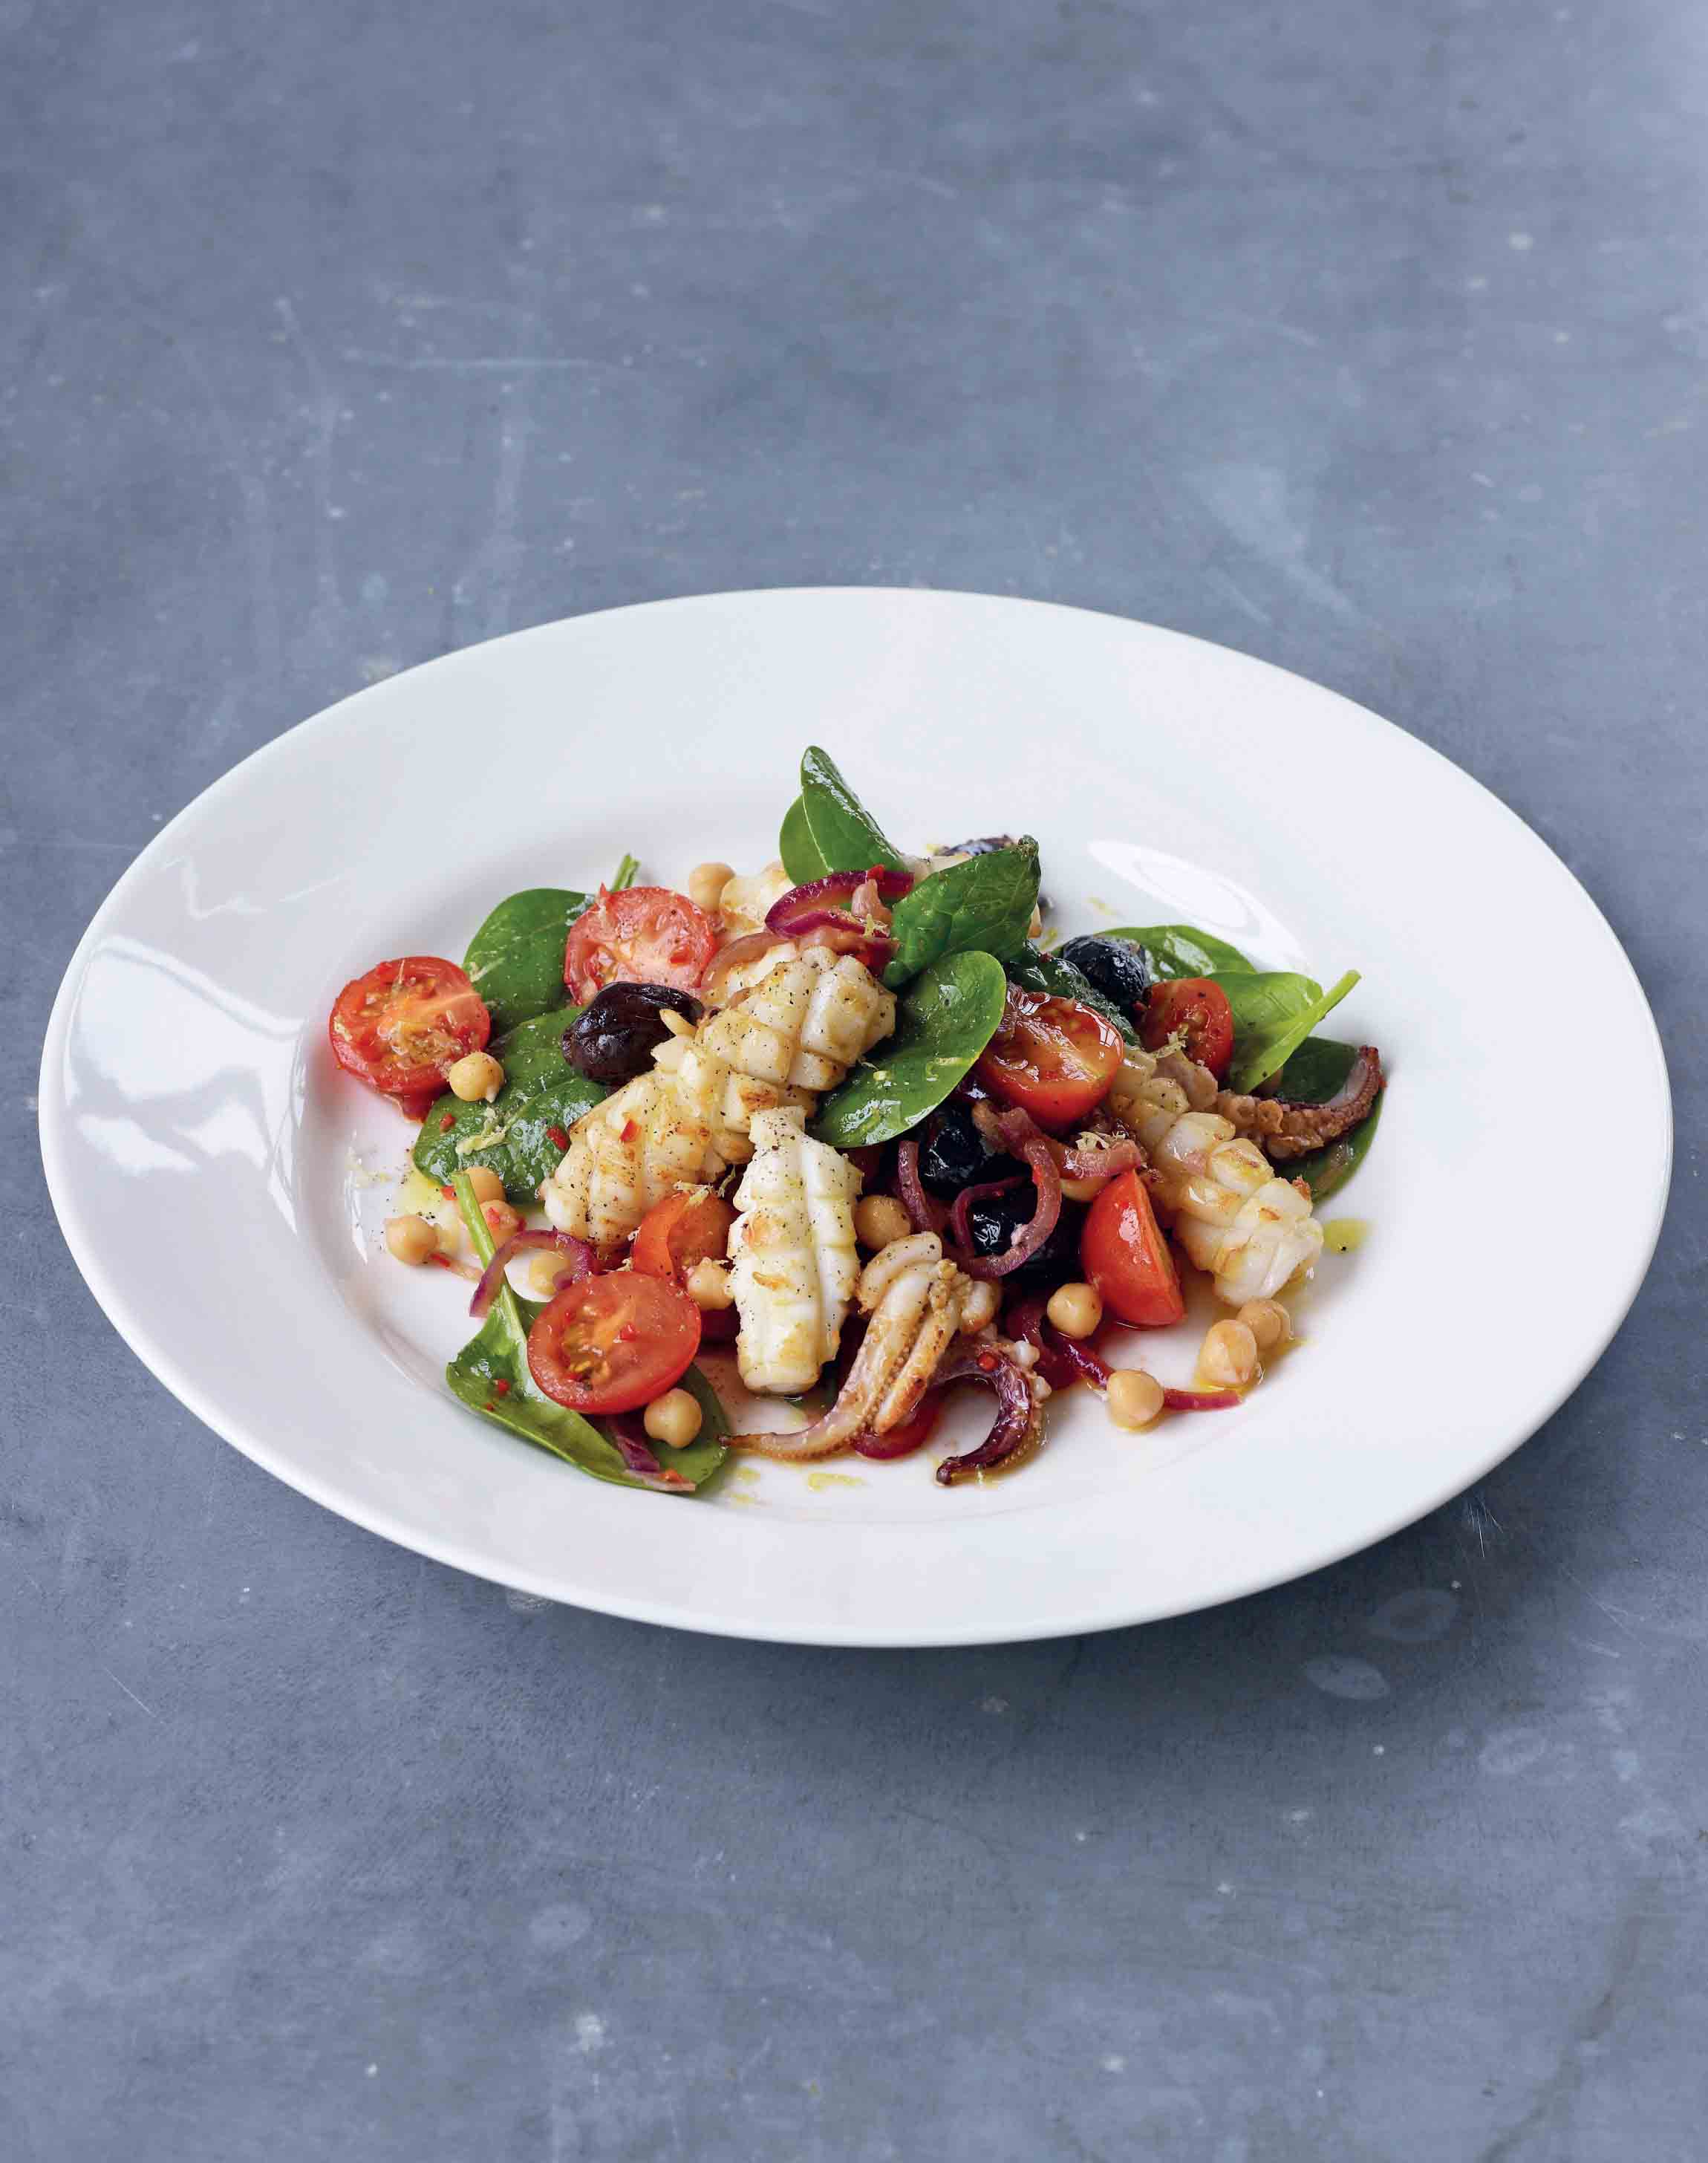 Pan-fried squid with chickpea, tomato, olive and chilli salad